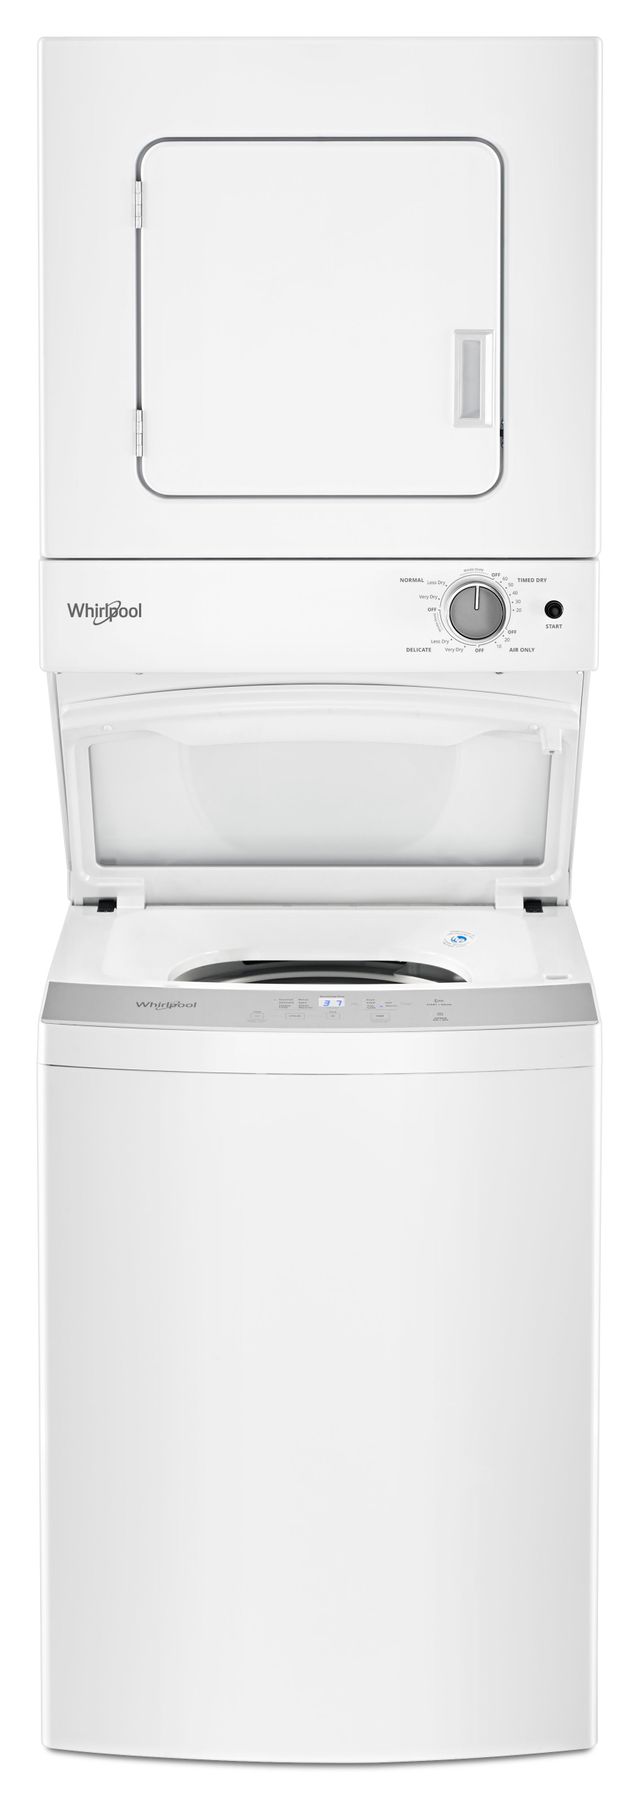 Whirlpool® 1.6 Cu. Ft. Washer, 3.4 Cu. Ft. Dryer White Electric Stacked Laundry 9